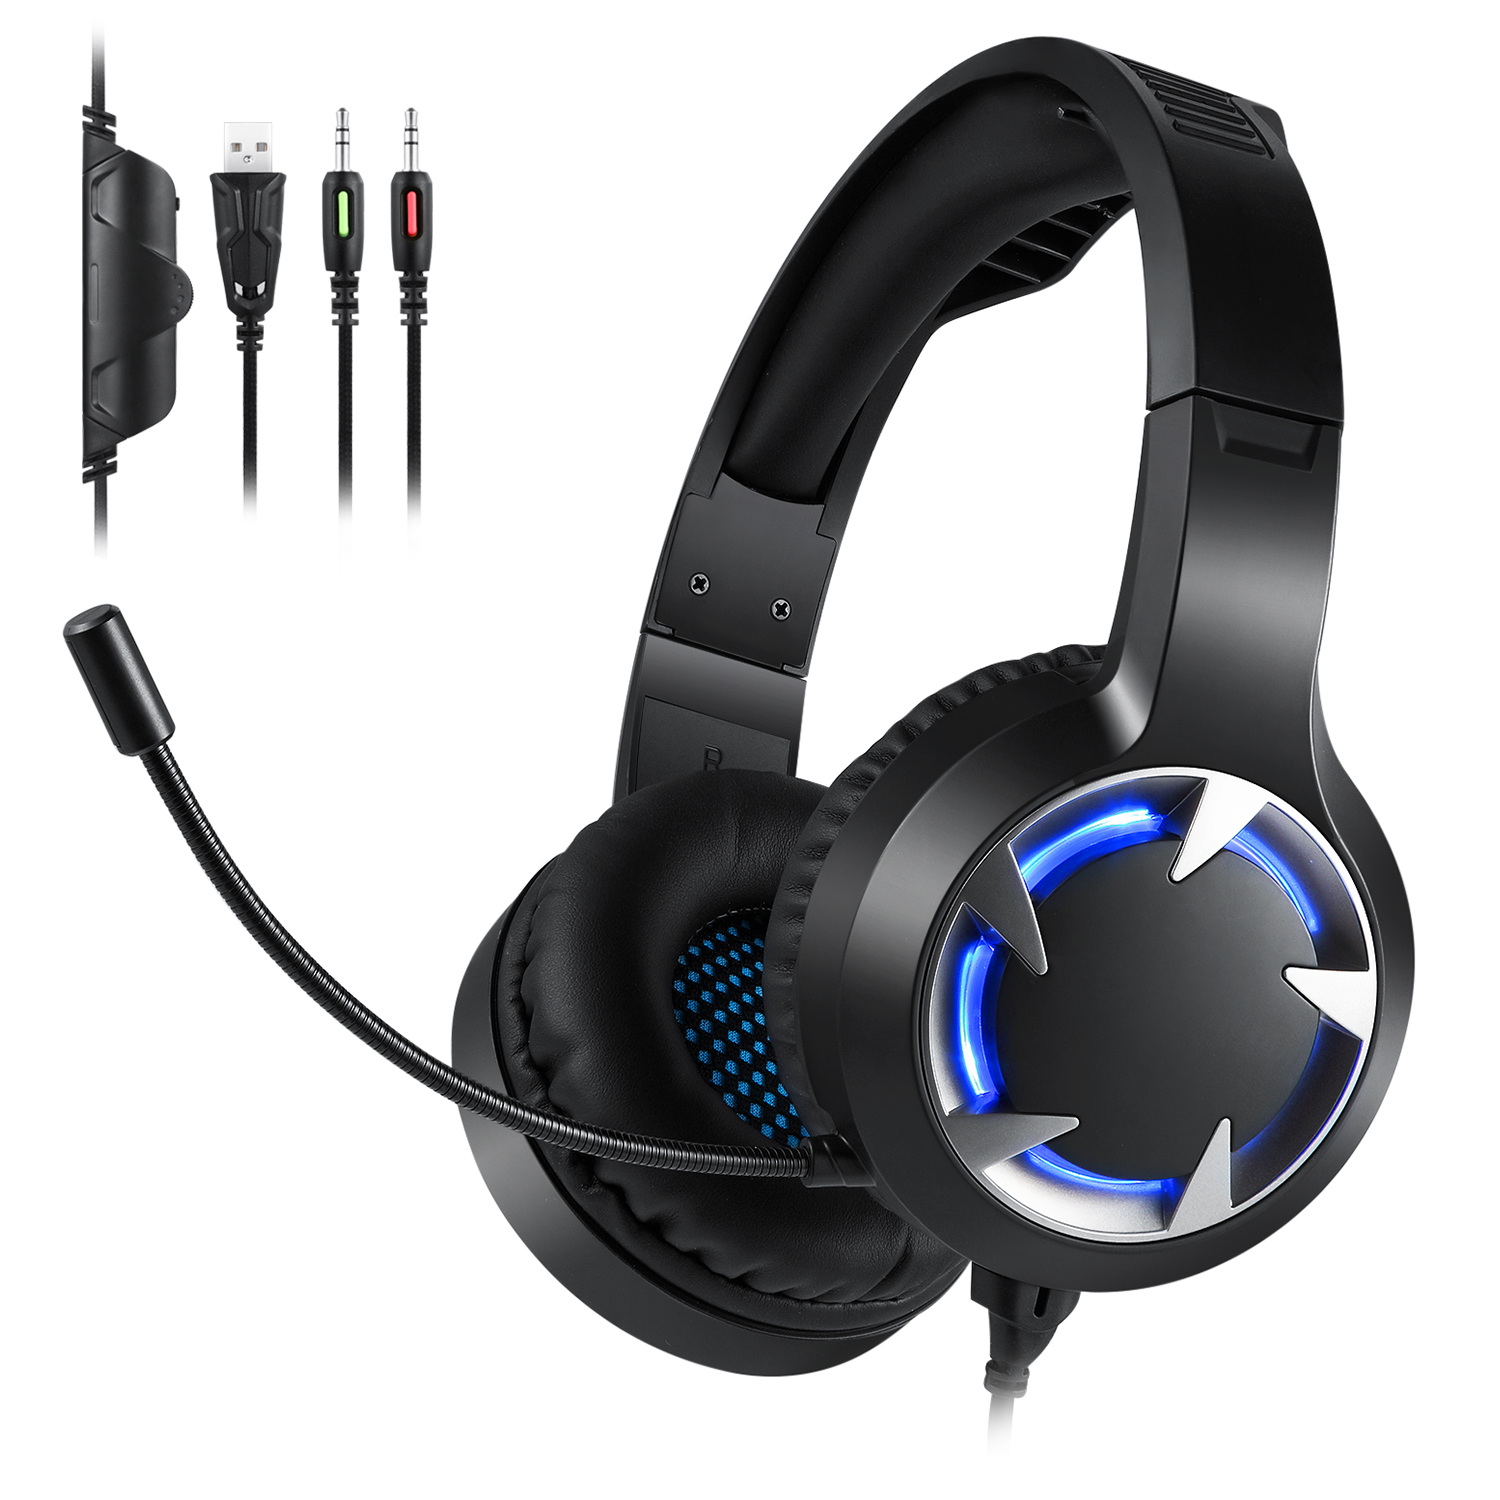 Wired Best Cost High Performance Cheap PC PS4 Computer LED RGB Gaming Headset Wholesale for Gamer Shenzhen Headphones Noise Cancelling Earphone